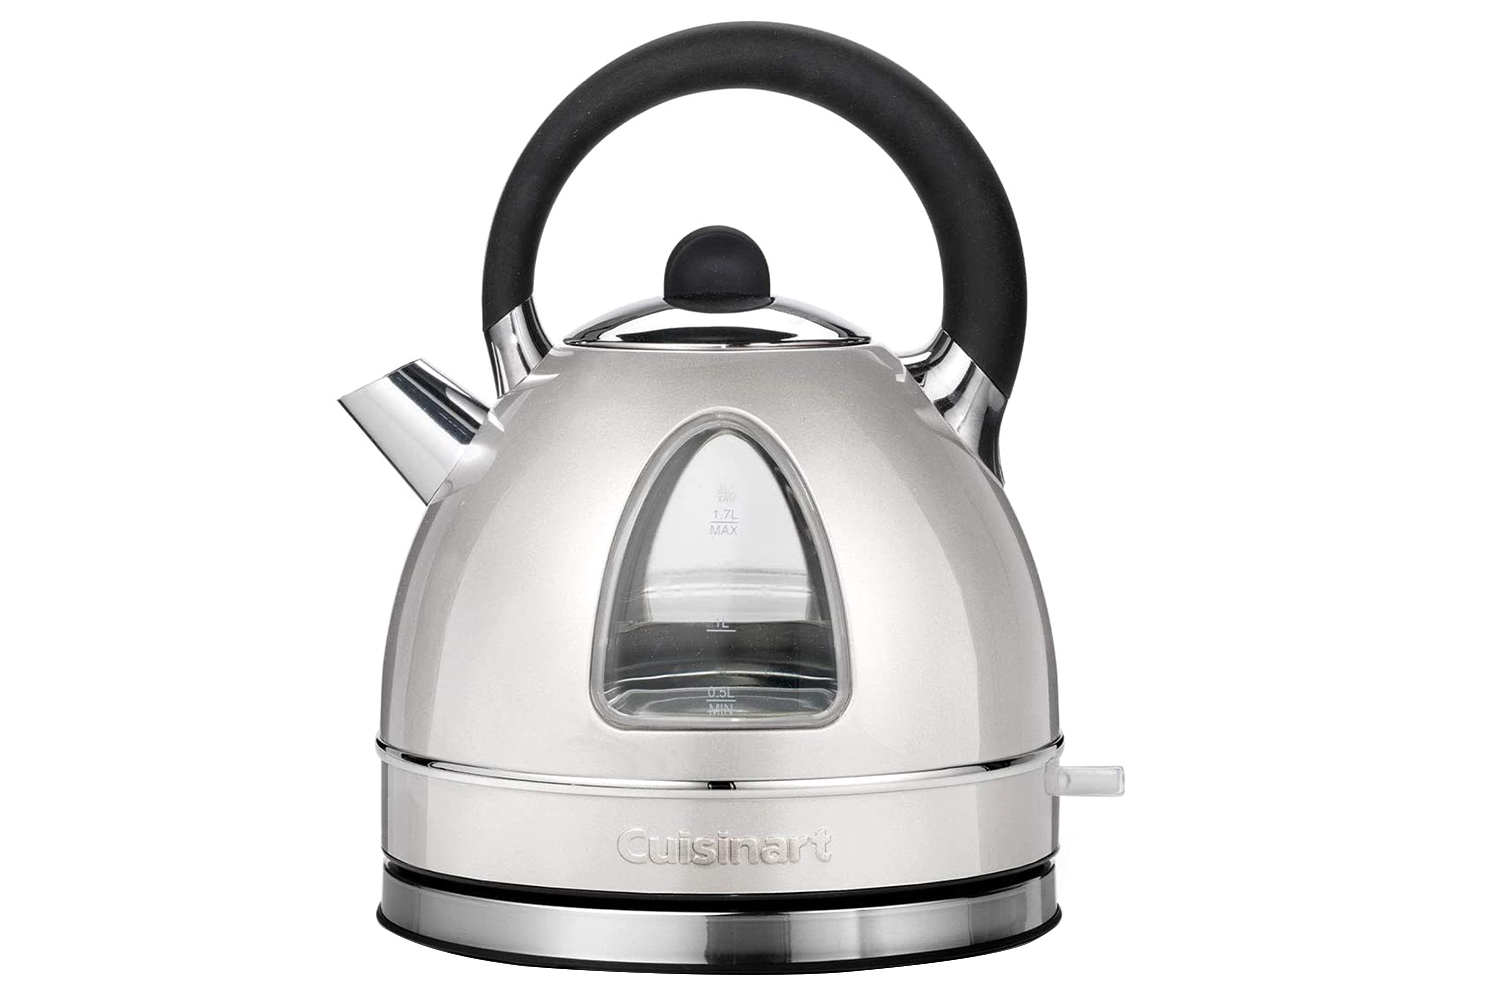 Cuisinart 1.7L Traditional Kettle 